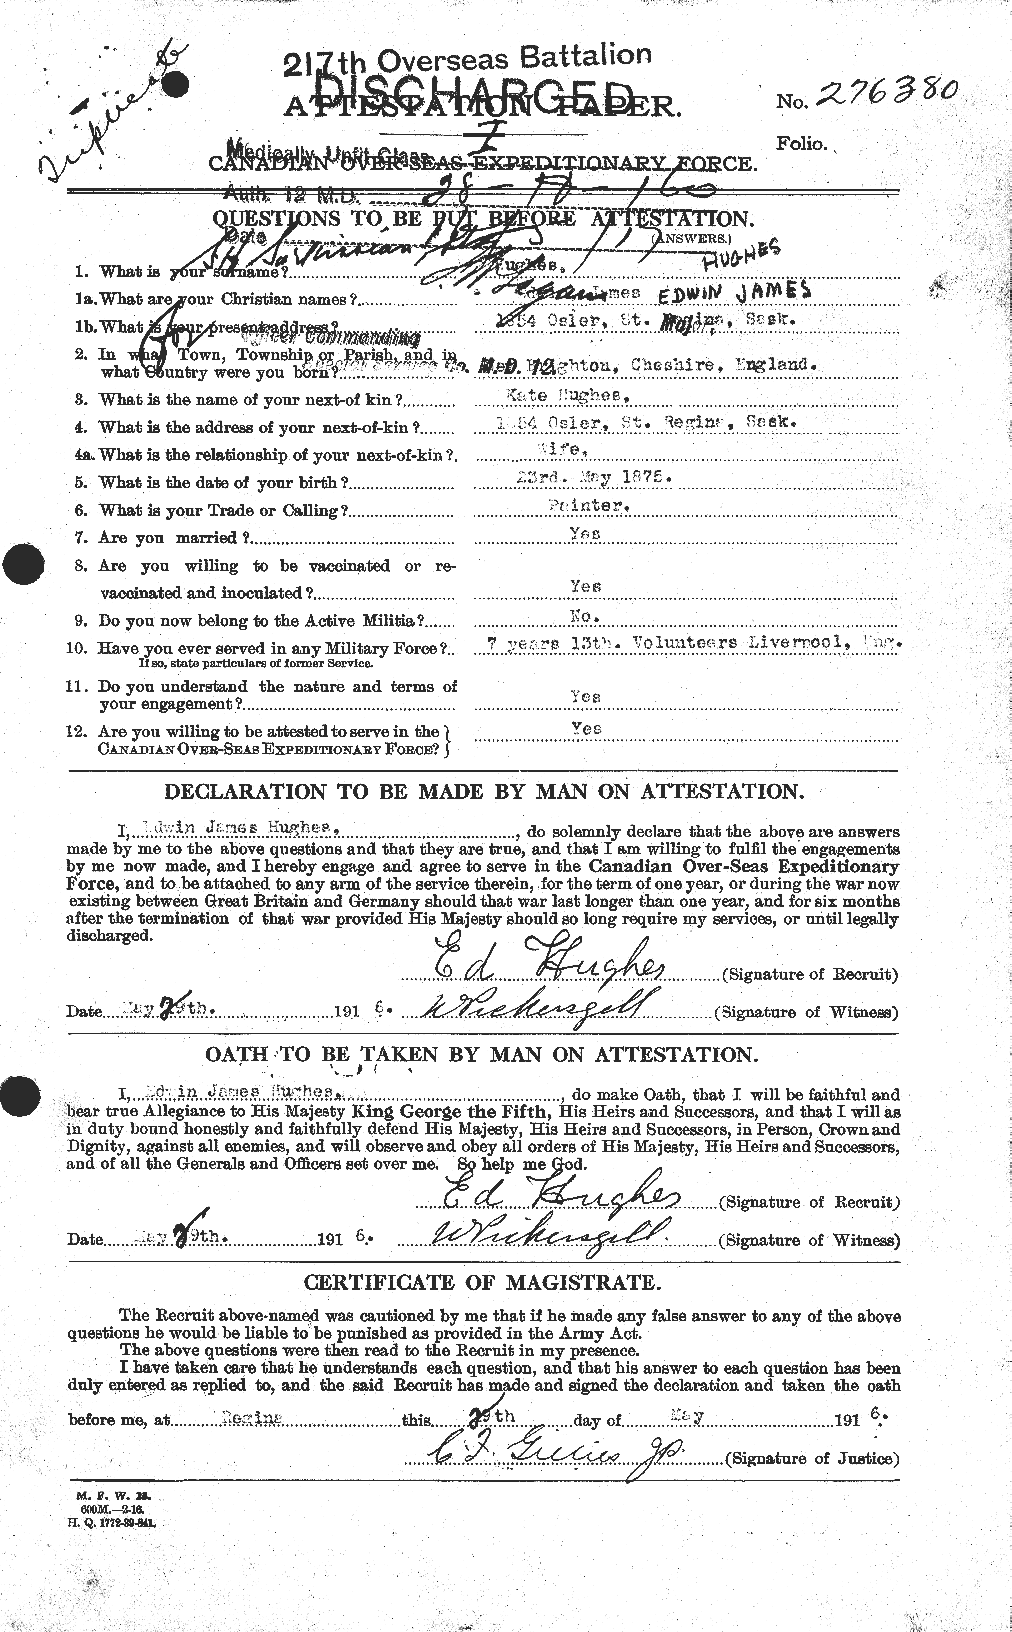 Personnel Records of the First World War - CEF 402697a